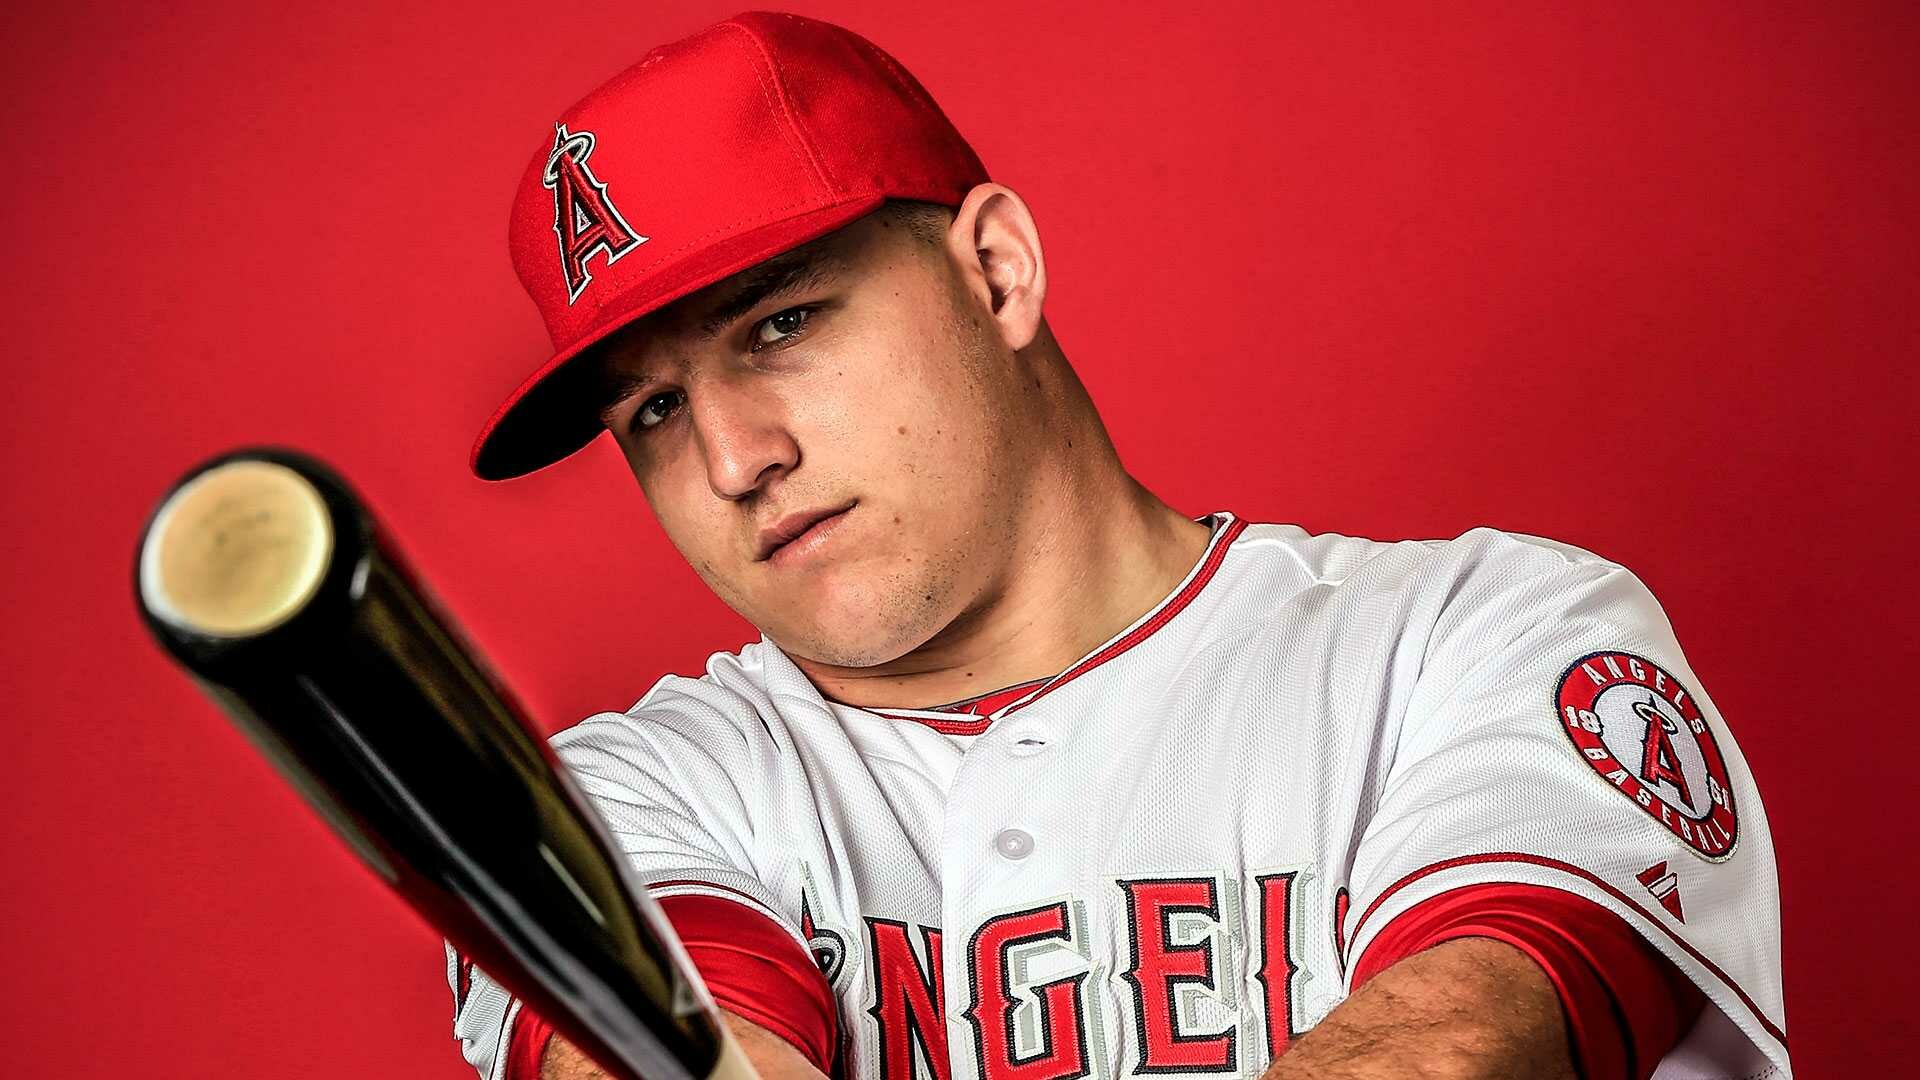 Mike Trout: Signed a 12-year, $426 million contract with the Angels, the second-richest contract in the history of North American sports. 1920x1080 Full HD Background.